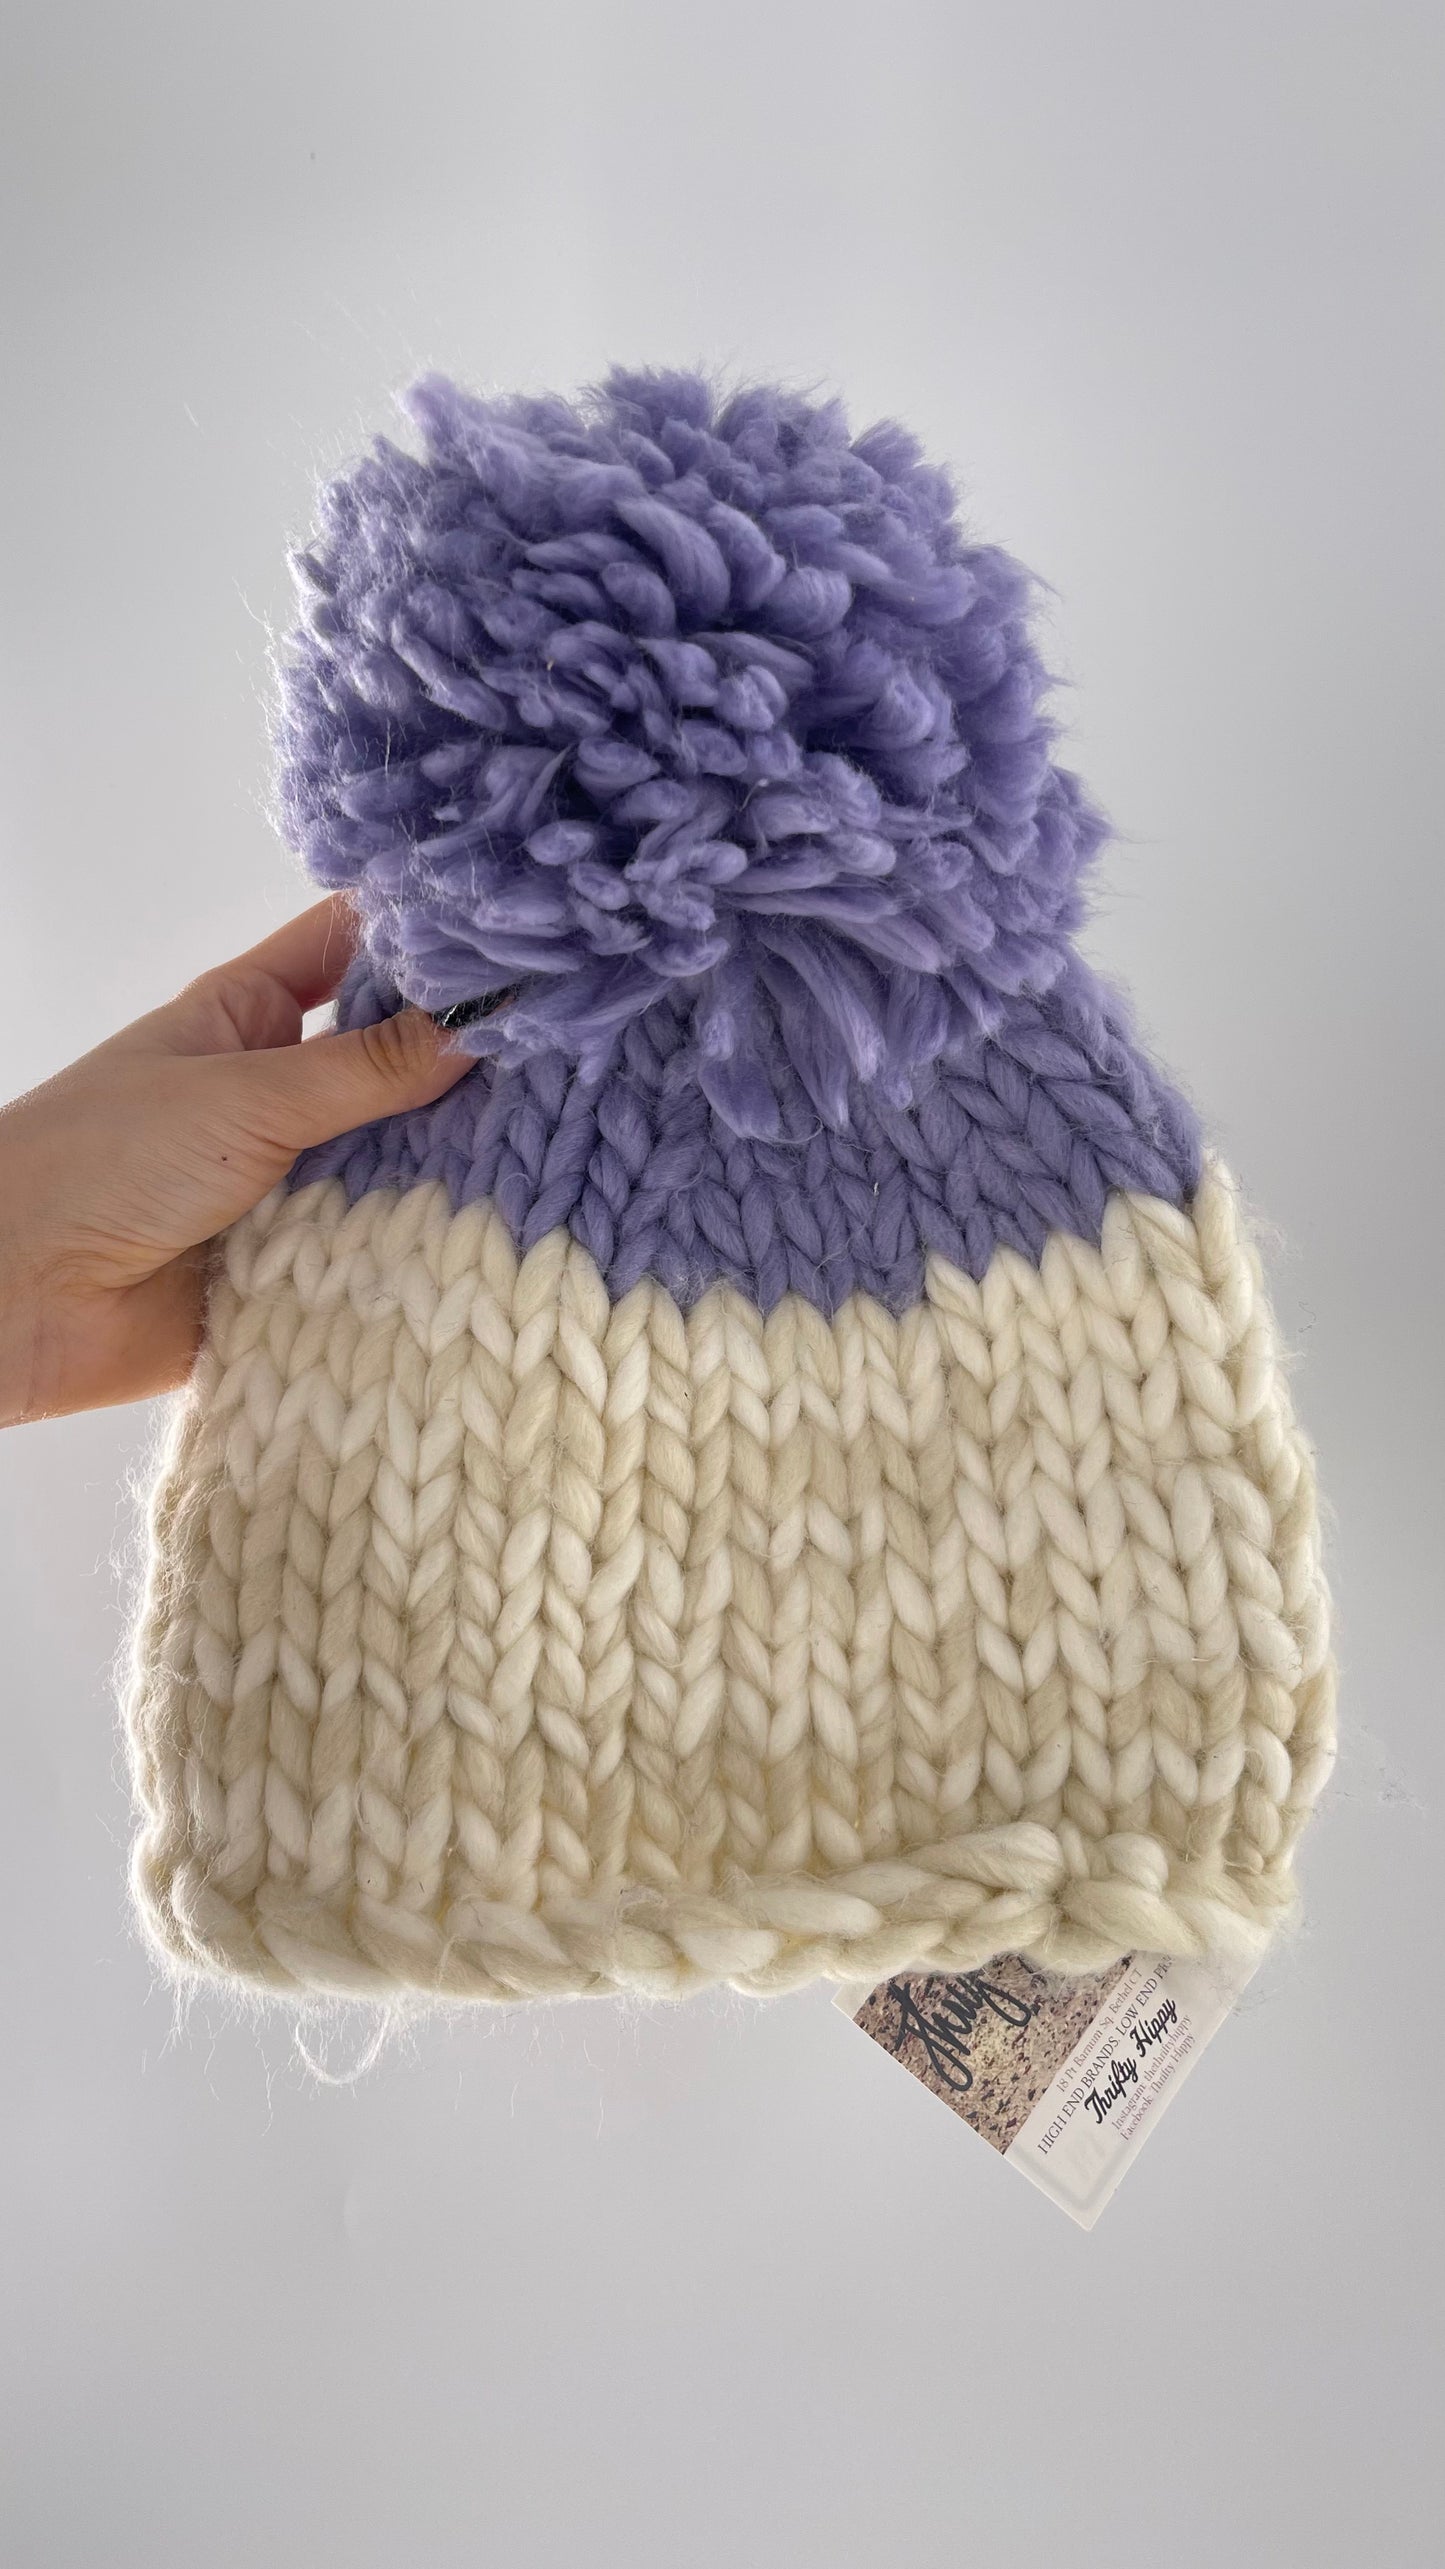 Free People White Knit Beanie with Lilac/Lavender Pom